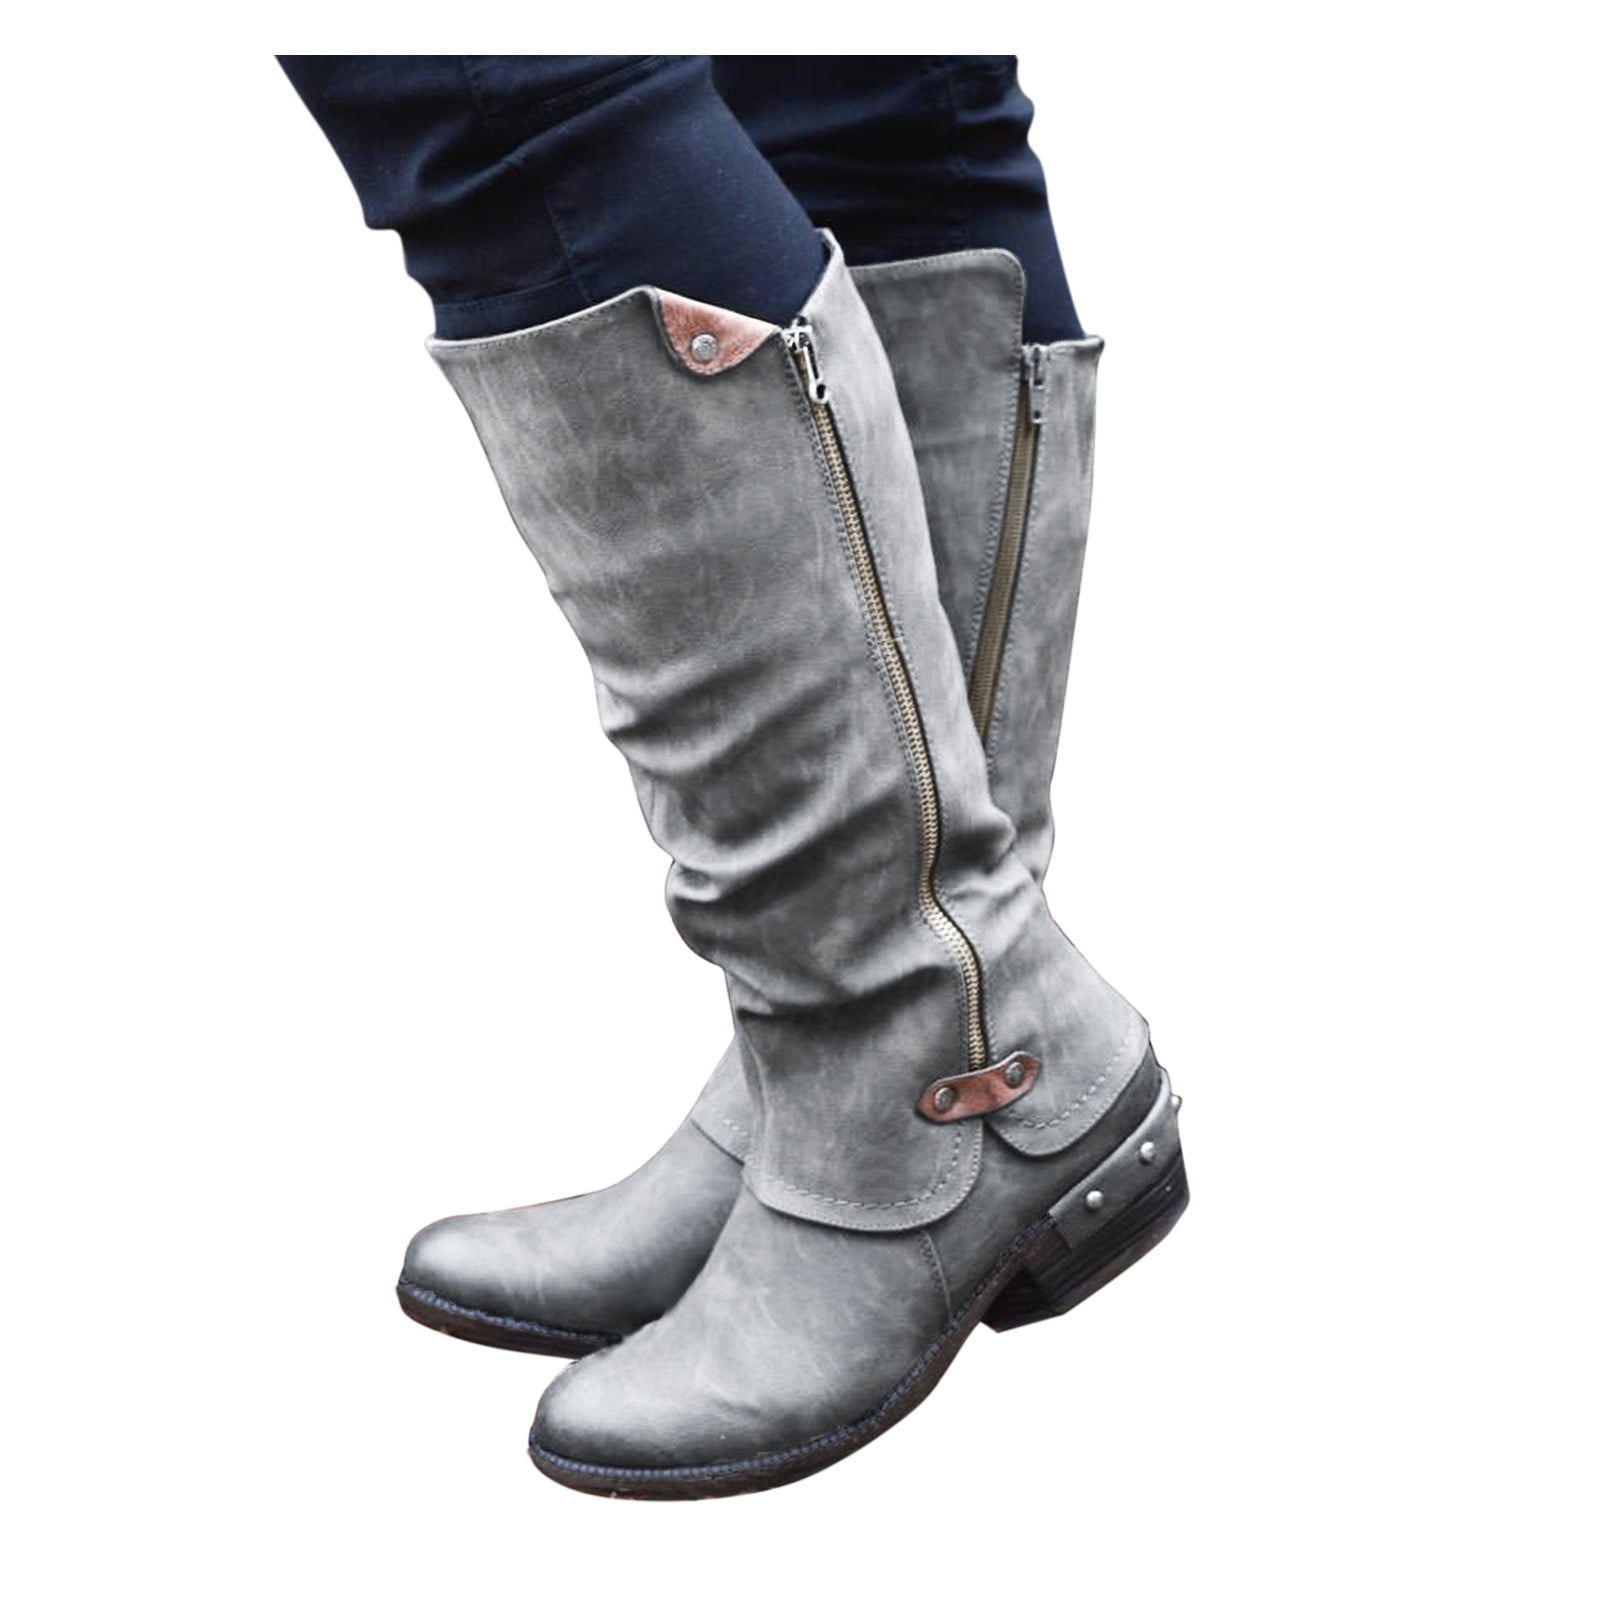 Women's Denim Knee High Boots Block Low Heels Round Toe Lace Up Buckle  Shoes | eBay